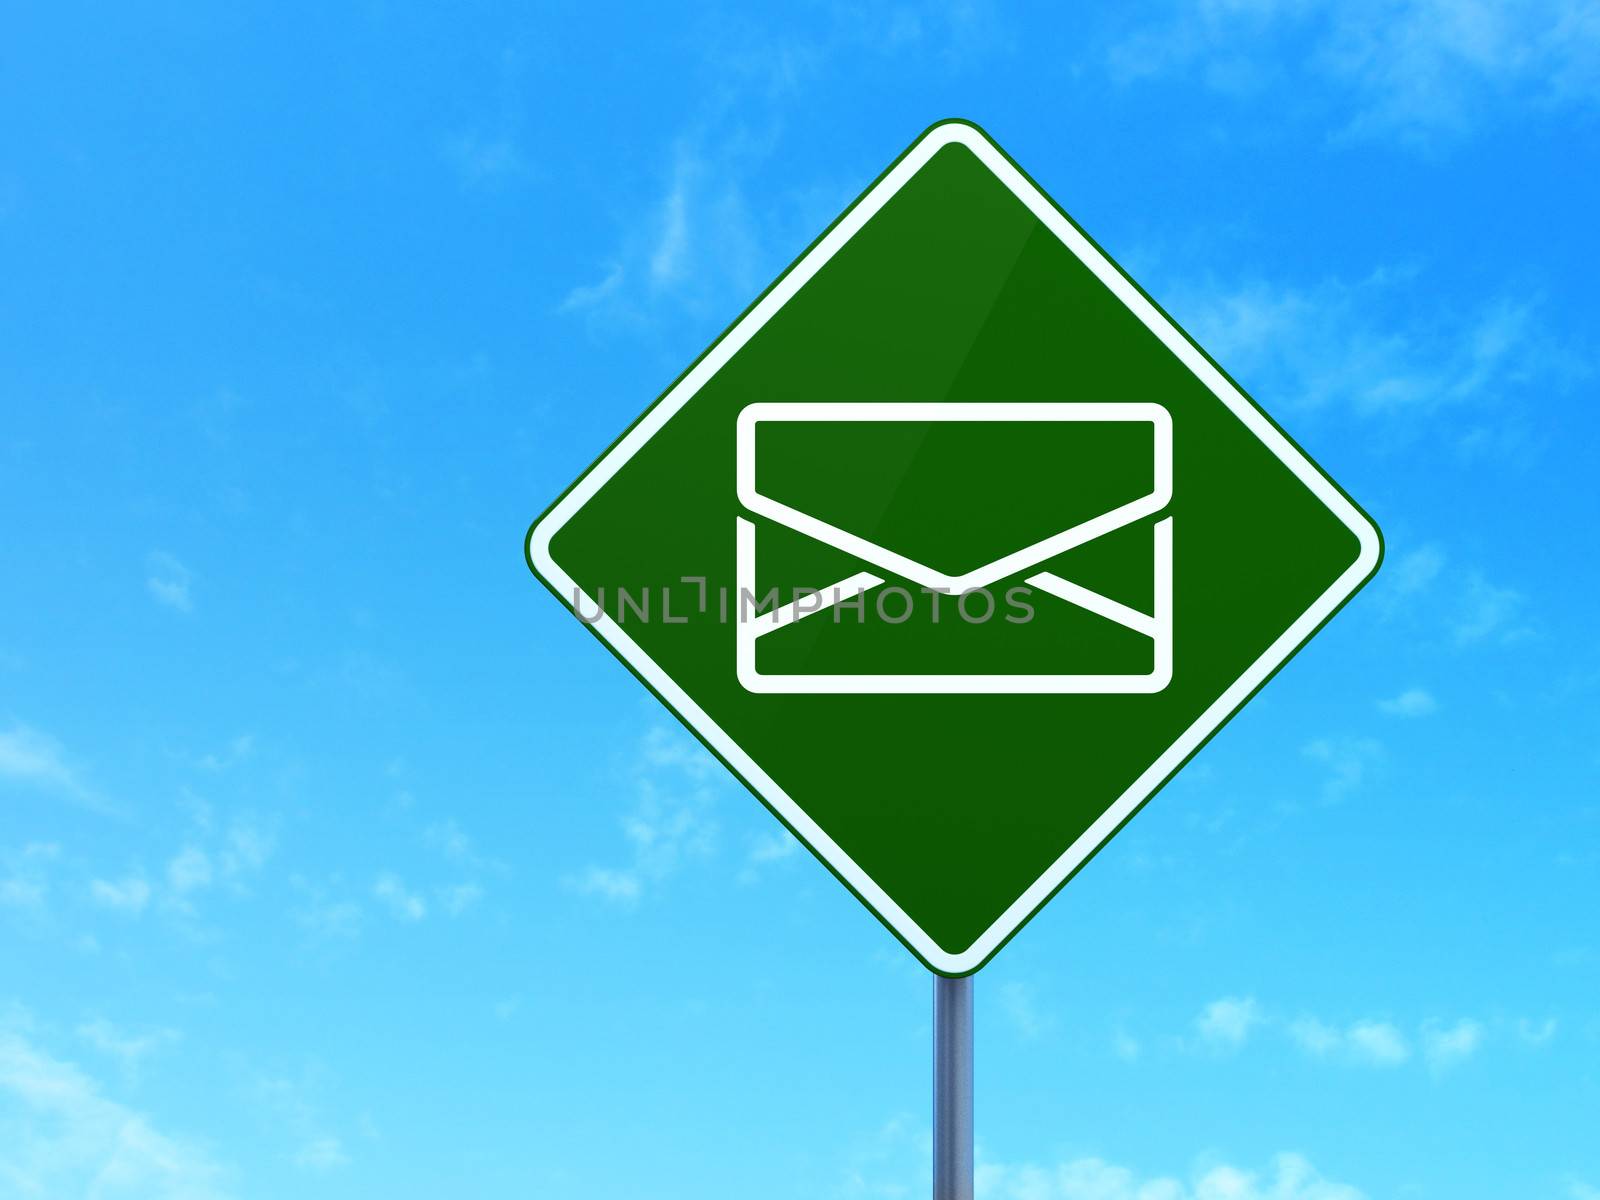 Finance concept: Email on green road (highway) sign, clear blue sky background, 3d render